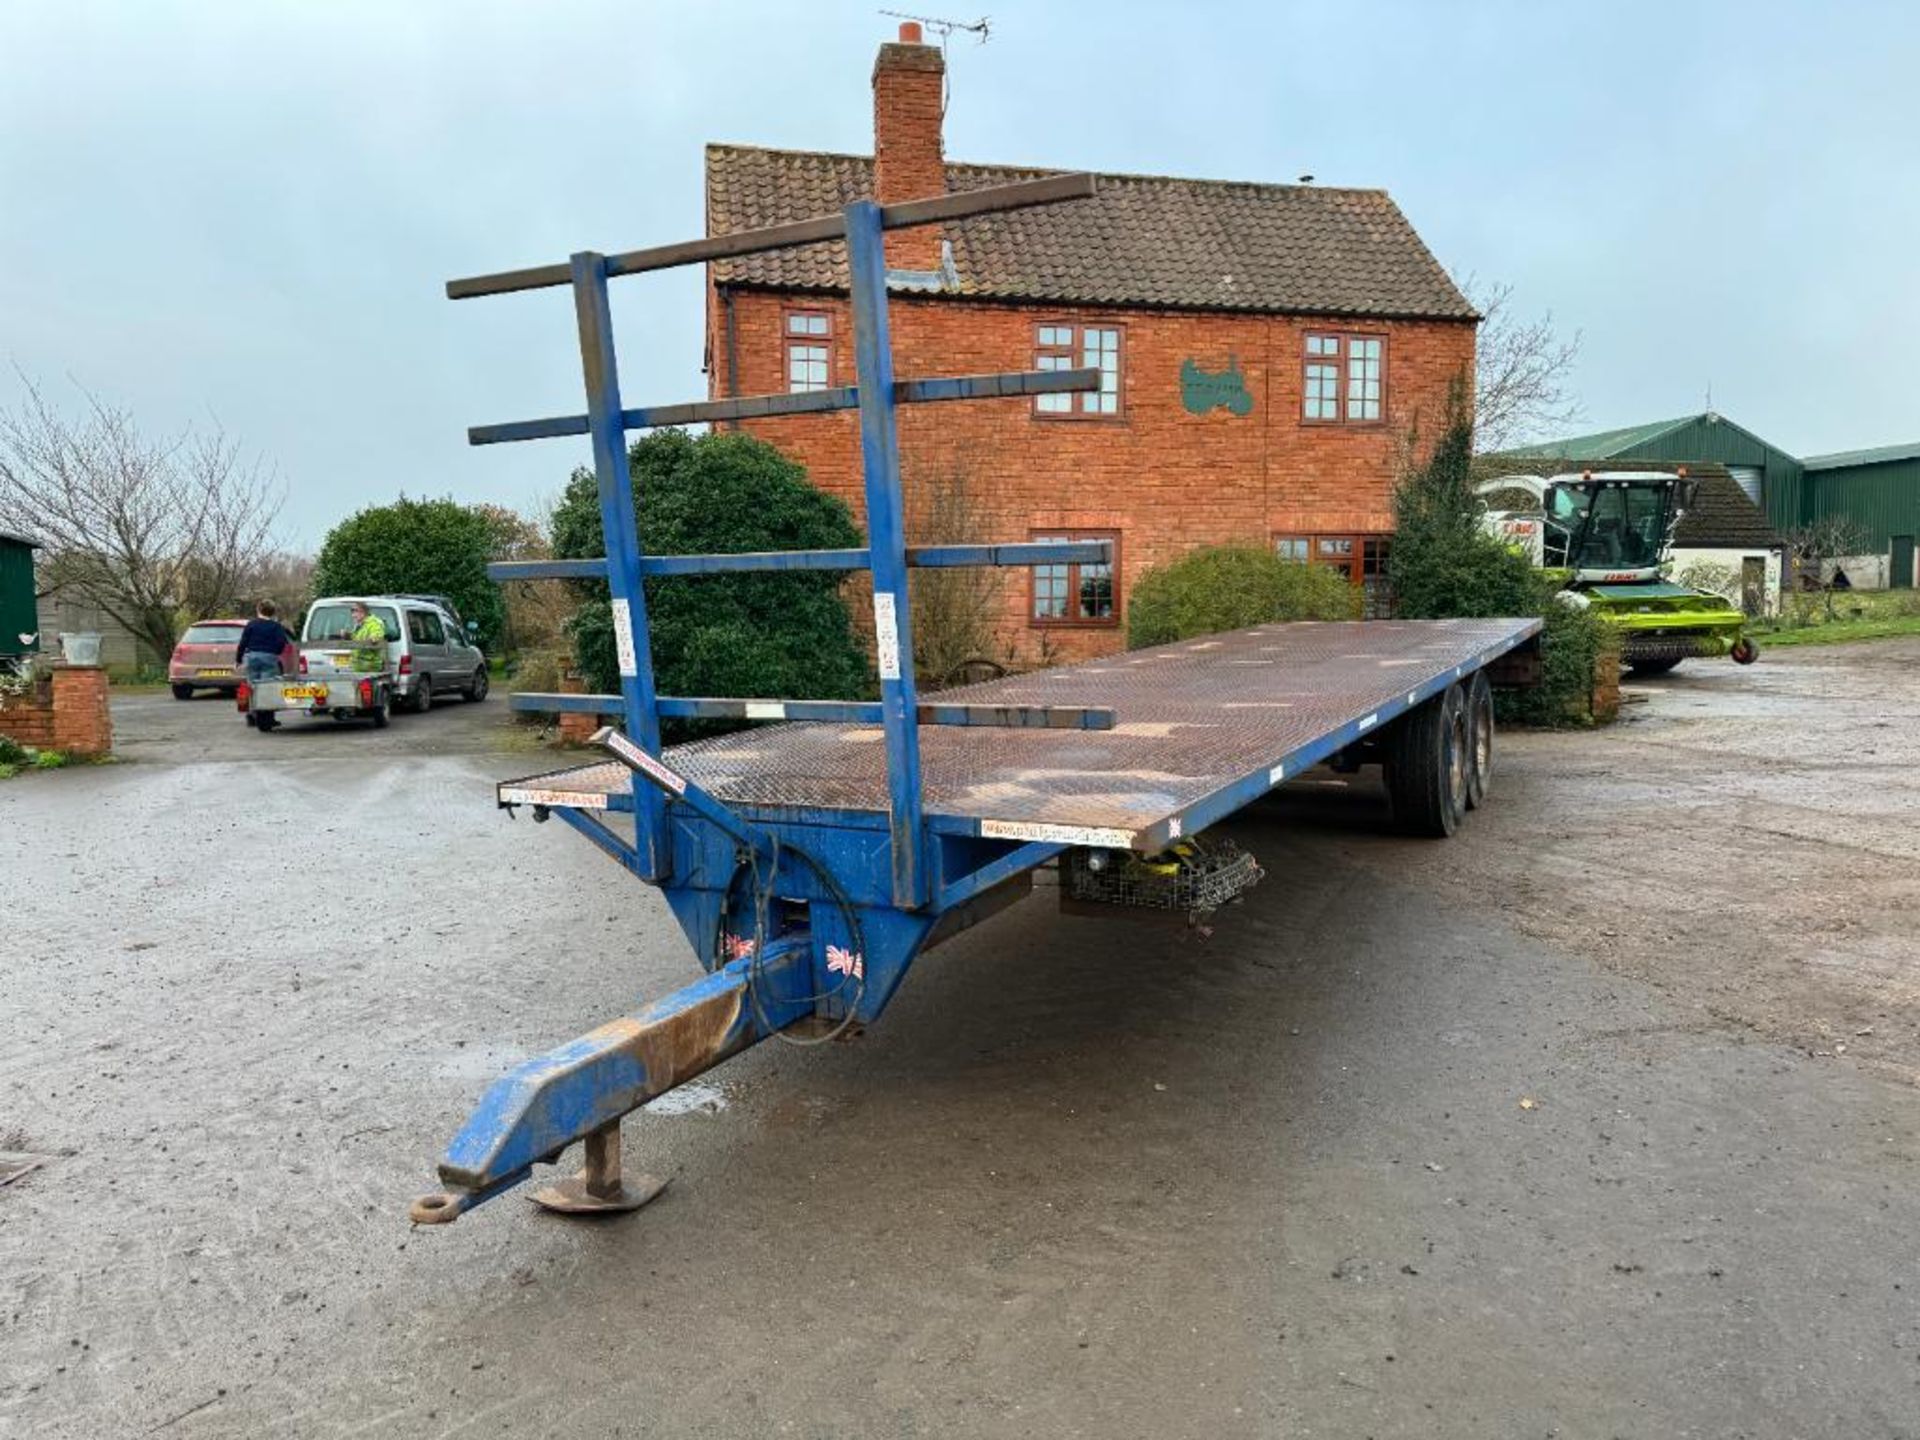 Philip Watkins 32ft twin axle flat bed trailer with metal floor, front bale rave, sprung drawbar and